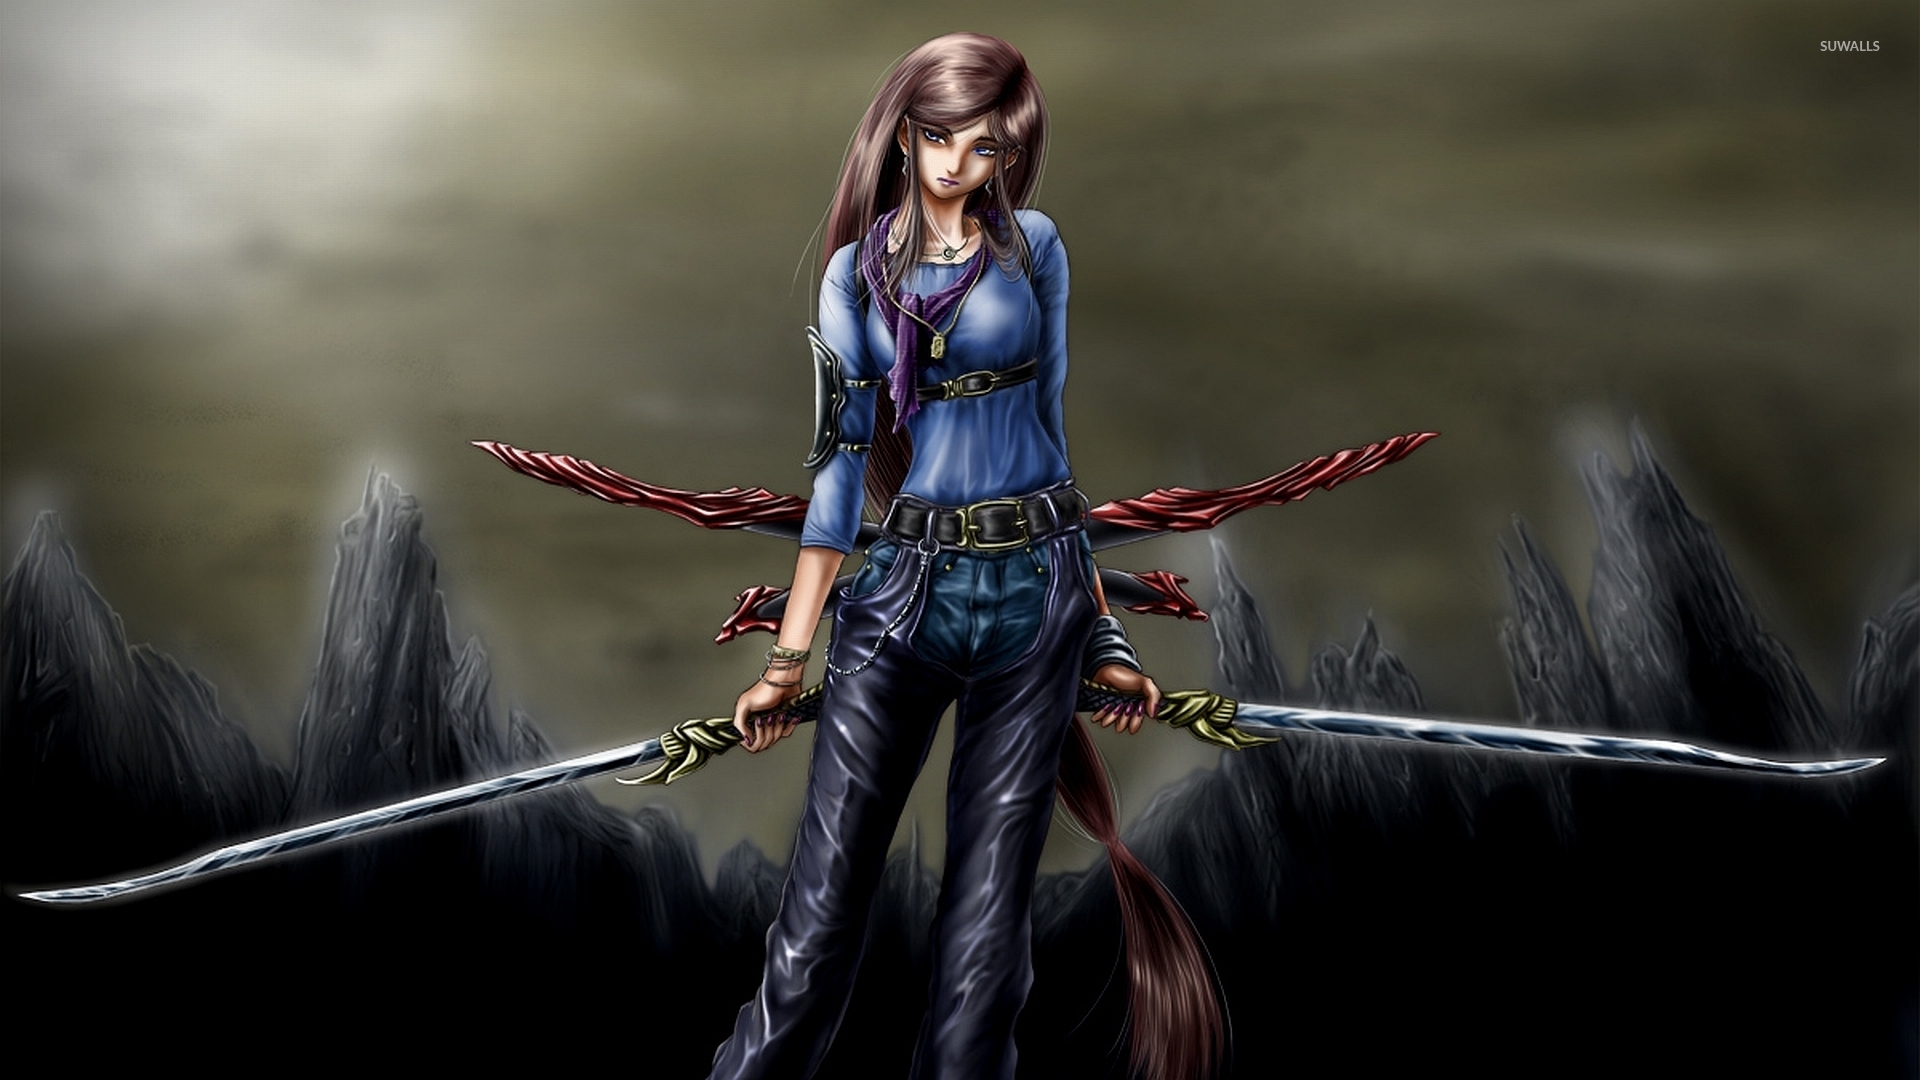 warrior woman wallpaper,action adventure game,cg artwork,fictional character,pc game,adventure game